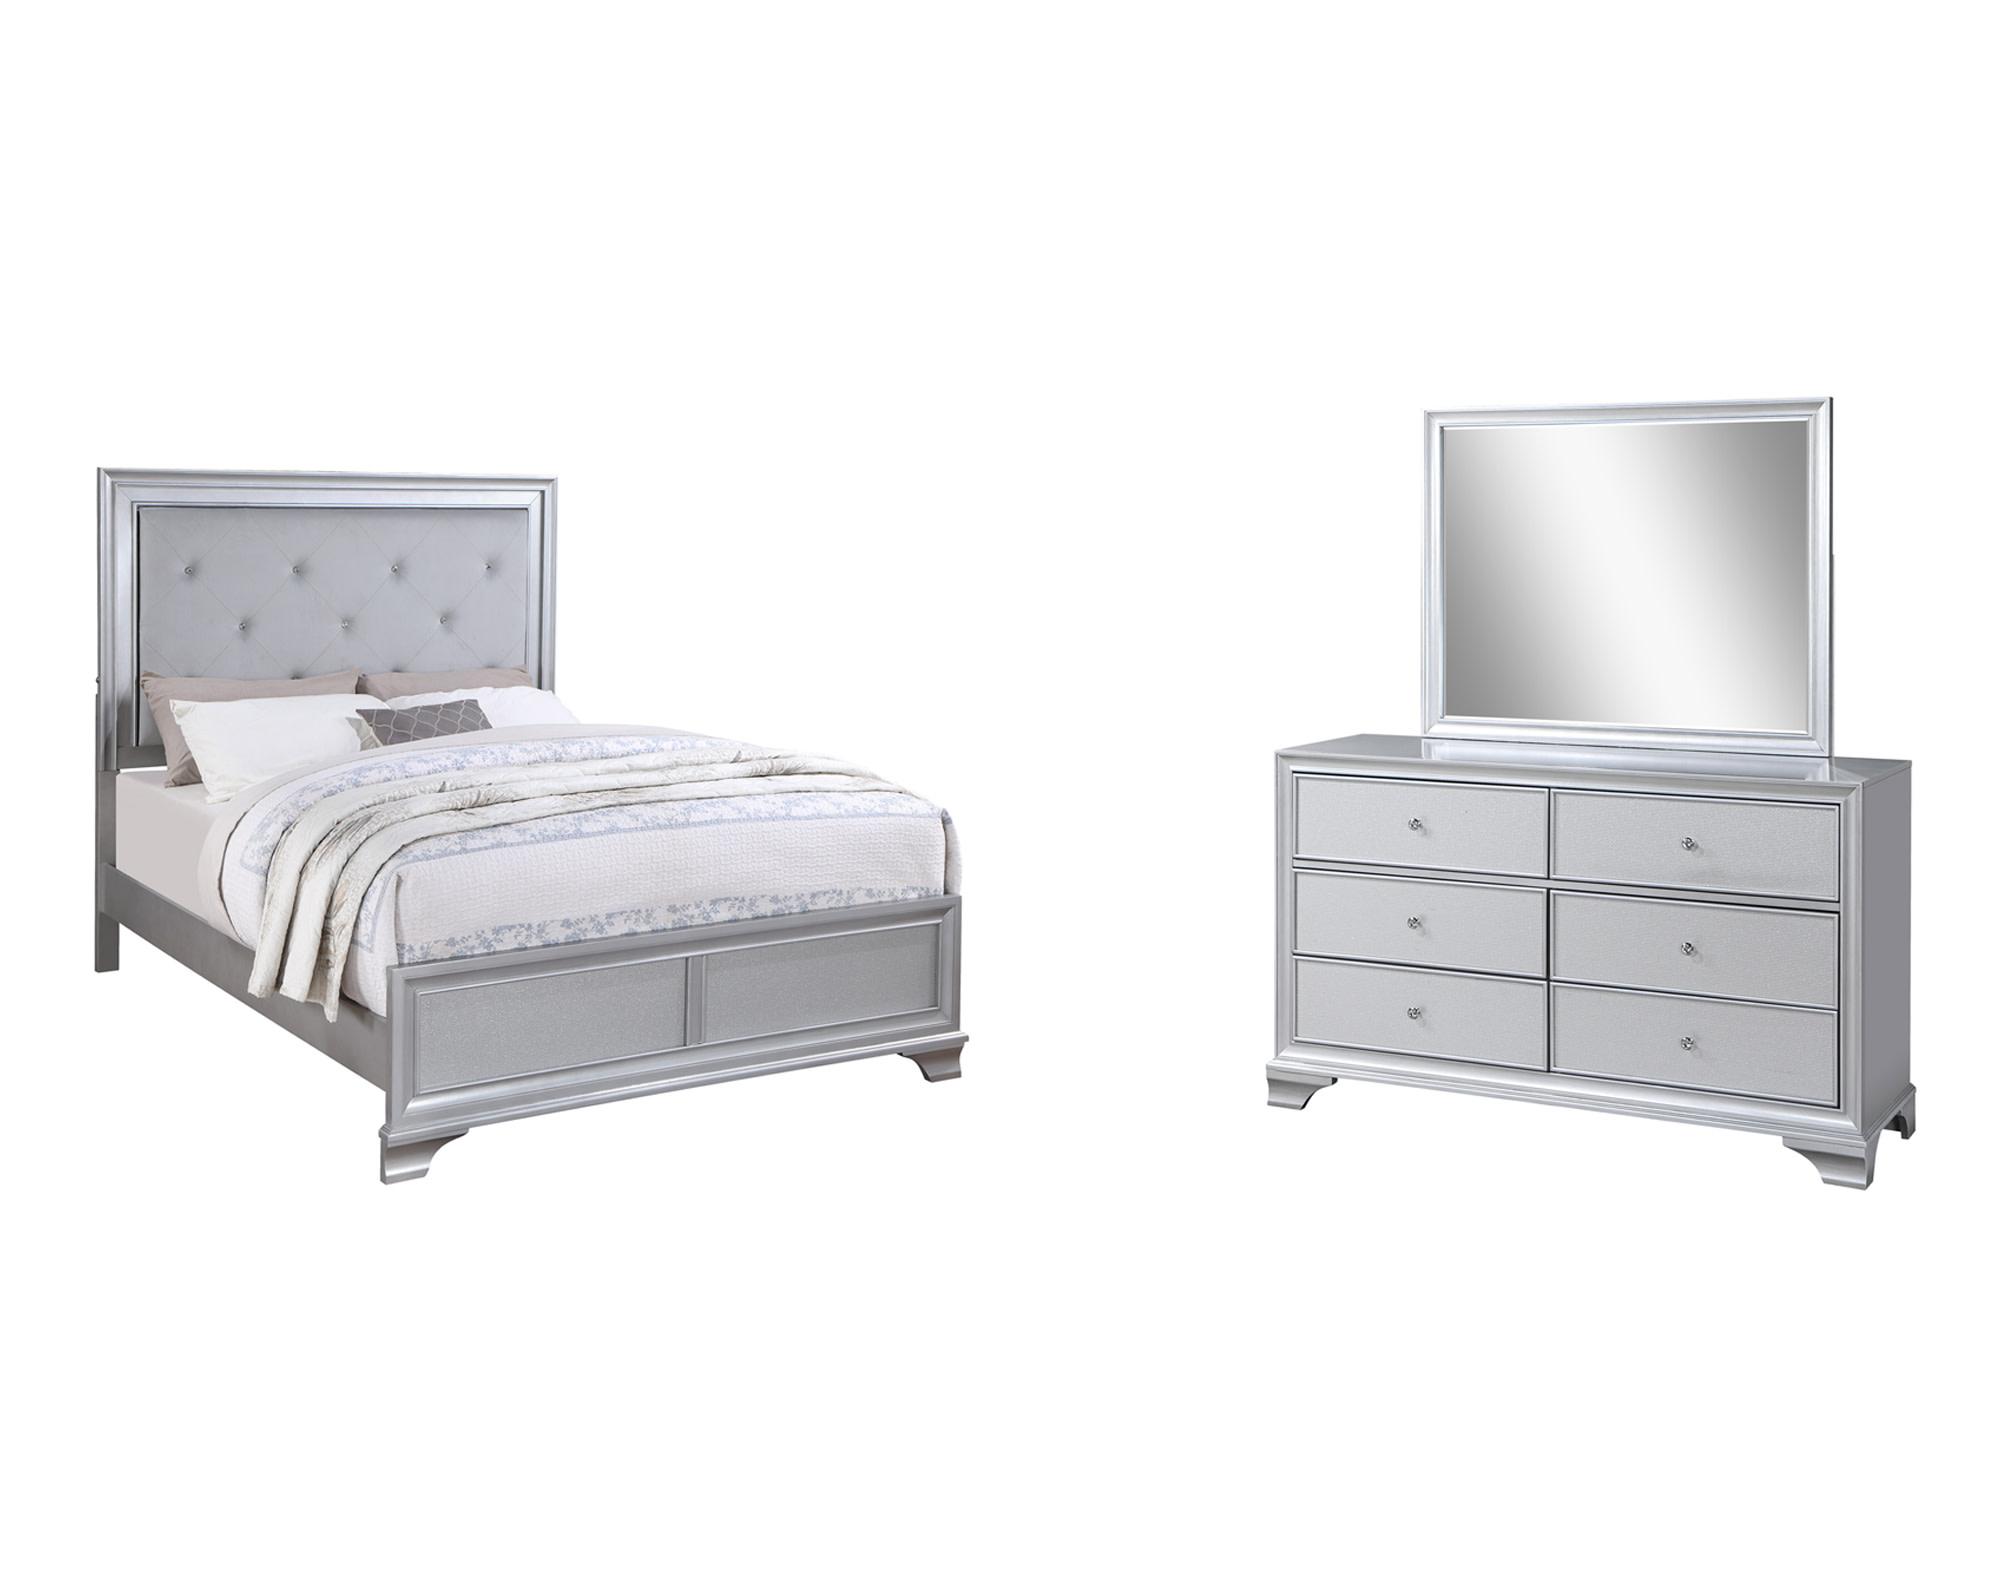 Gemma Silver King 3PC Bedroom Set with LED